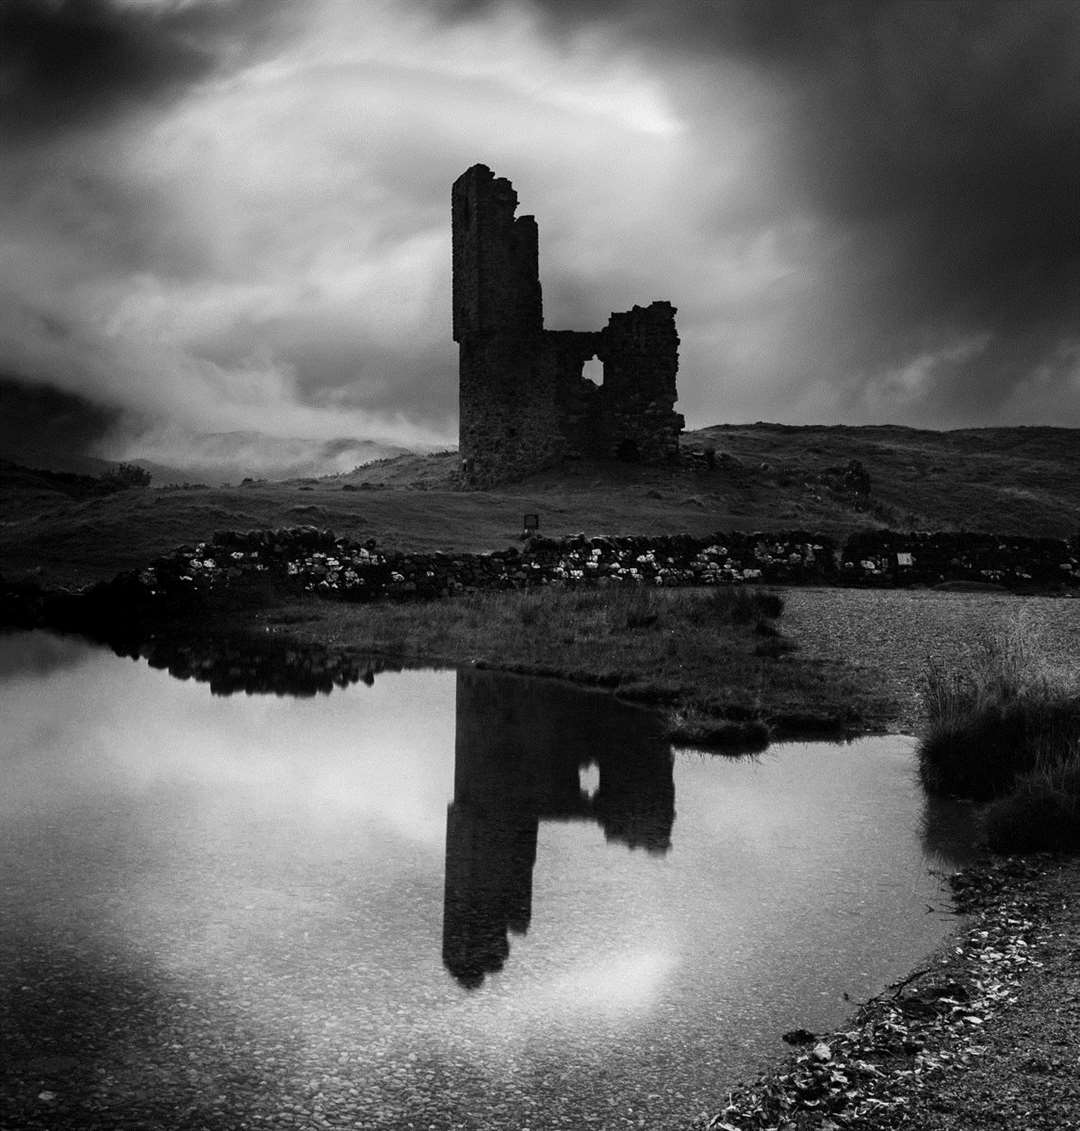 Andy Kirby, Dornoch came third in the monochrome category with his image of the Highland landmark, Ardvreck Castle.